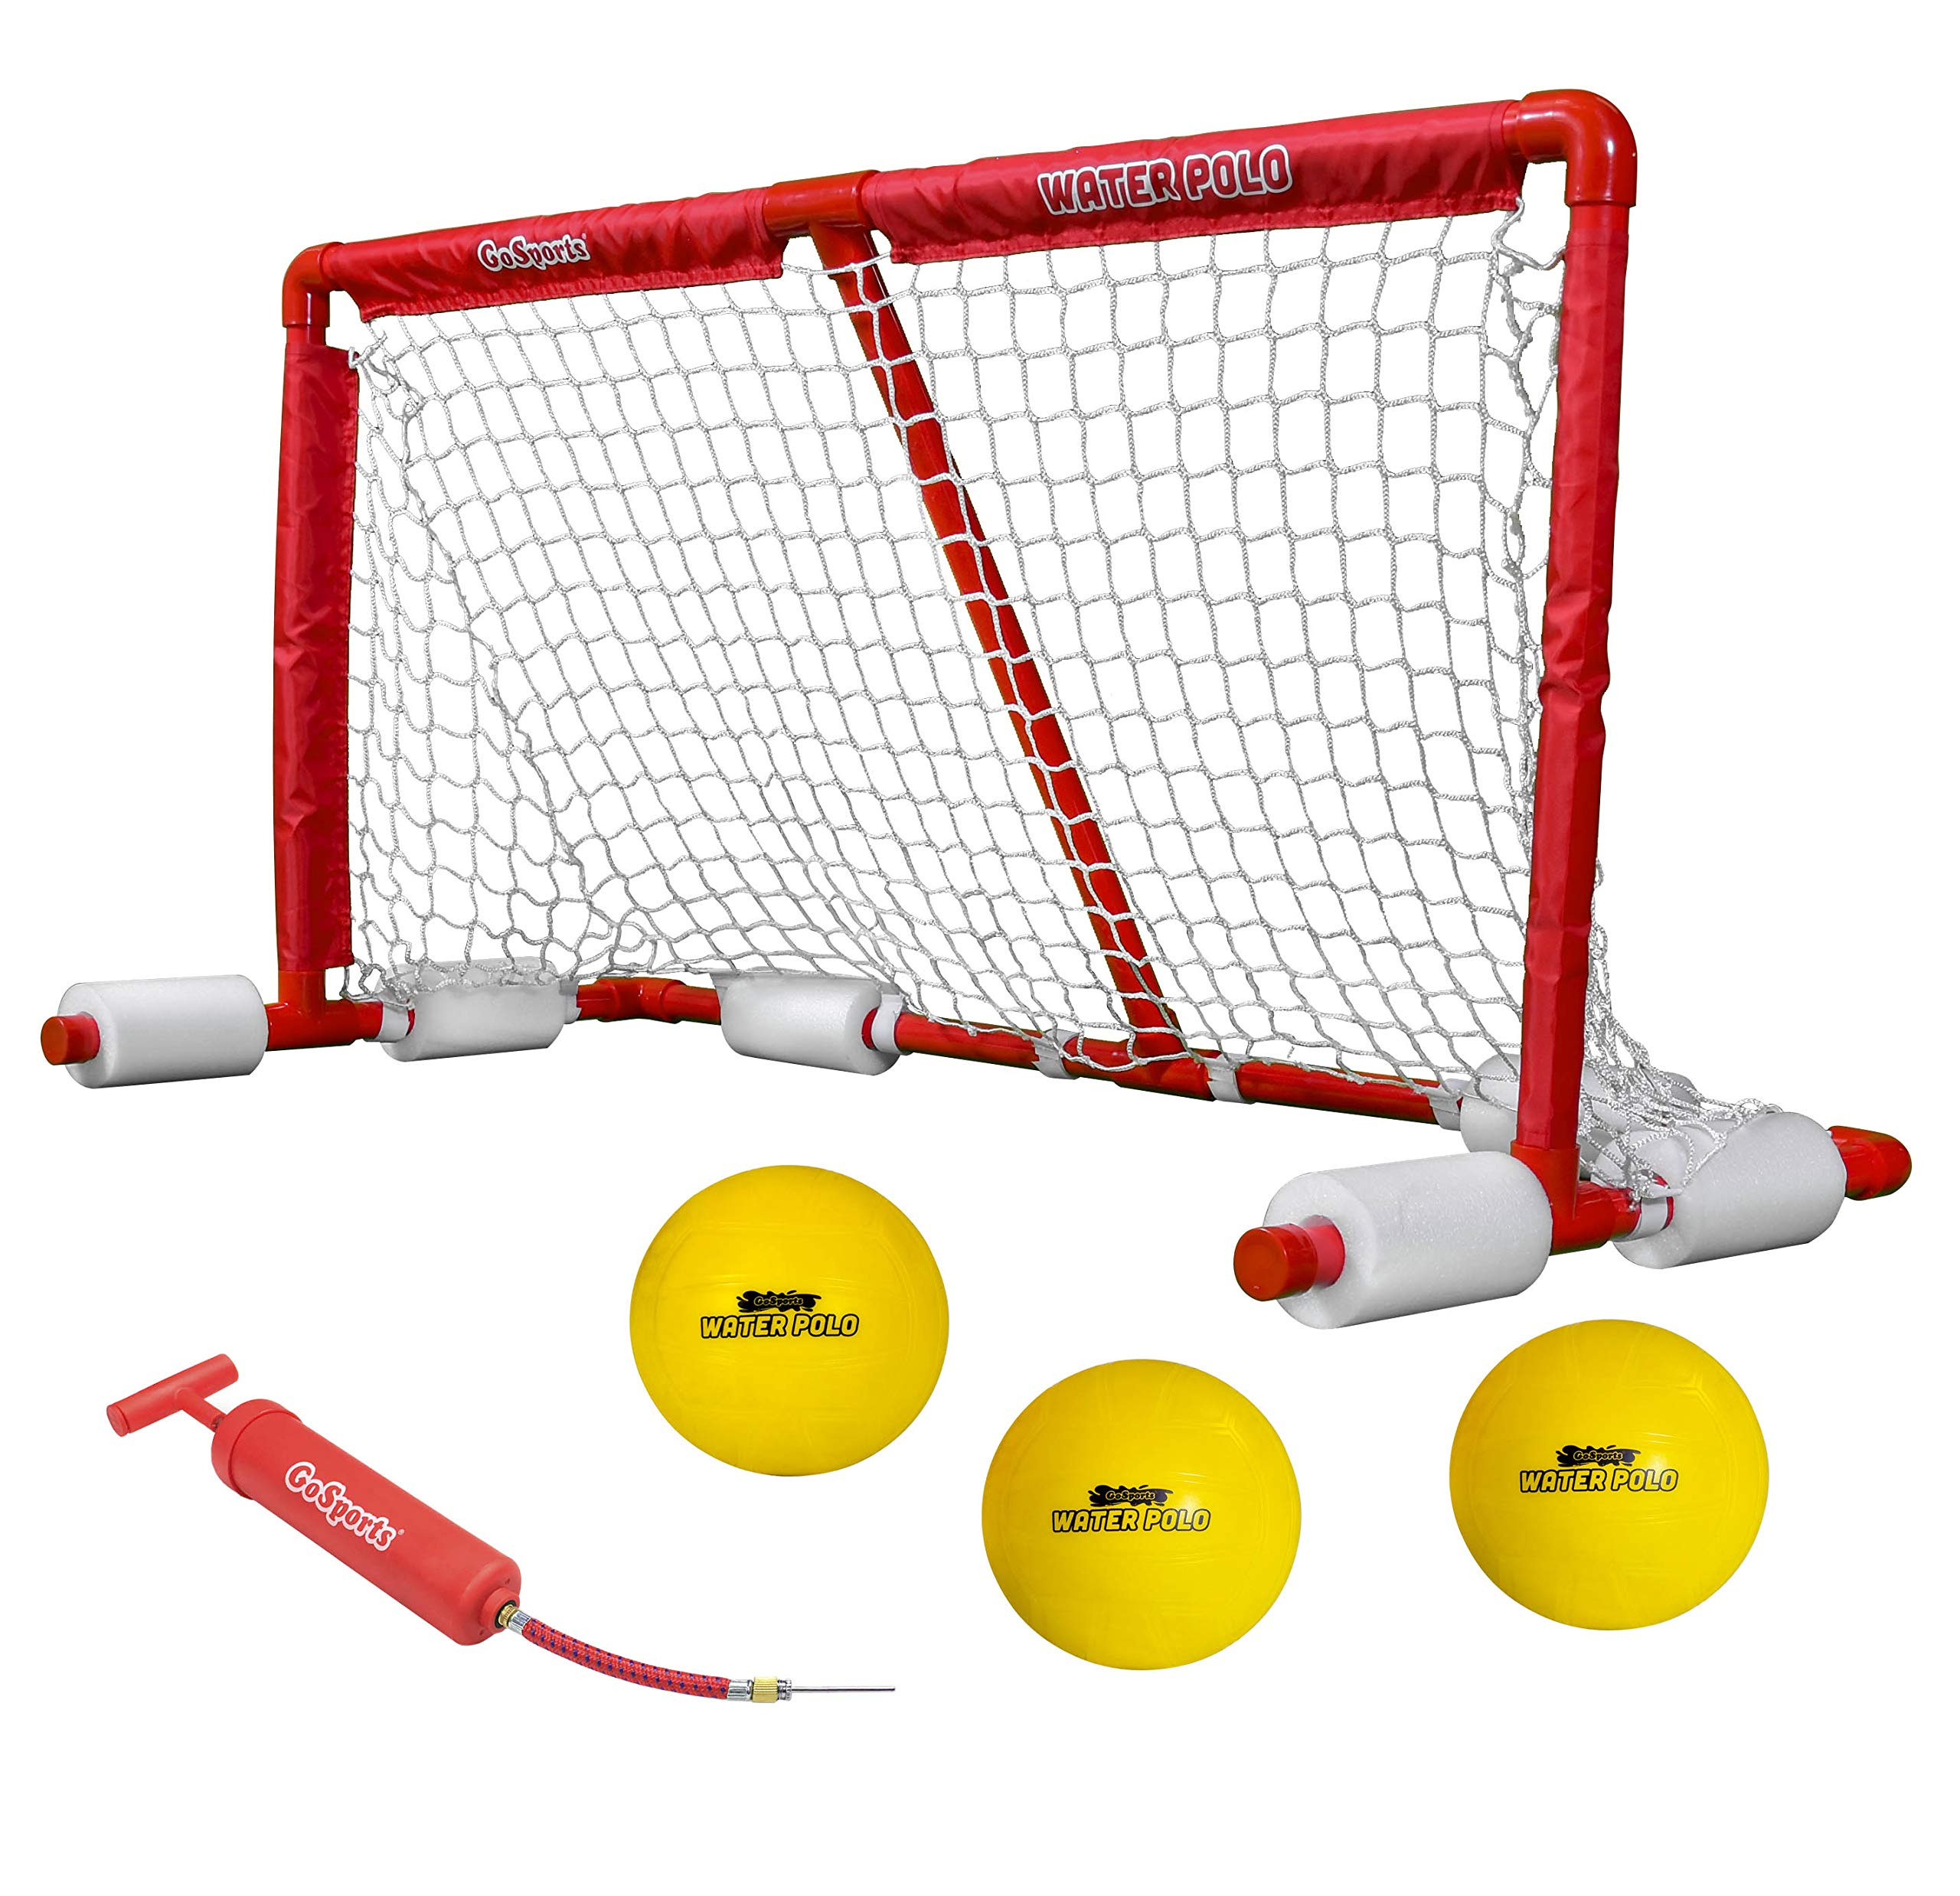 GoSports Floating Water Polo Game Set - Must-Have Summer Pool Game Includes Goal and 3 Balls